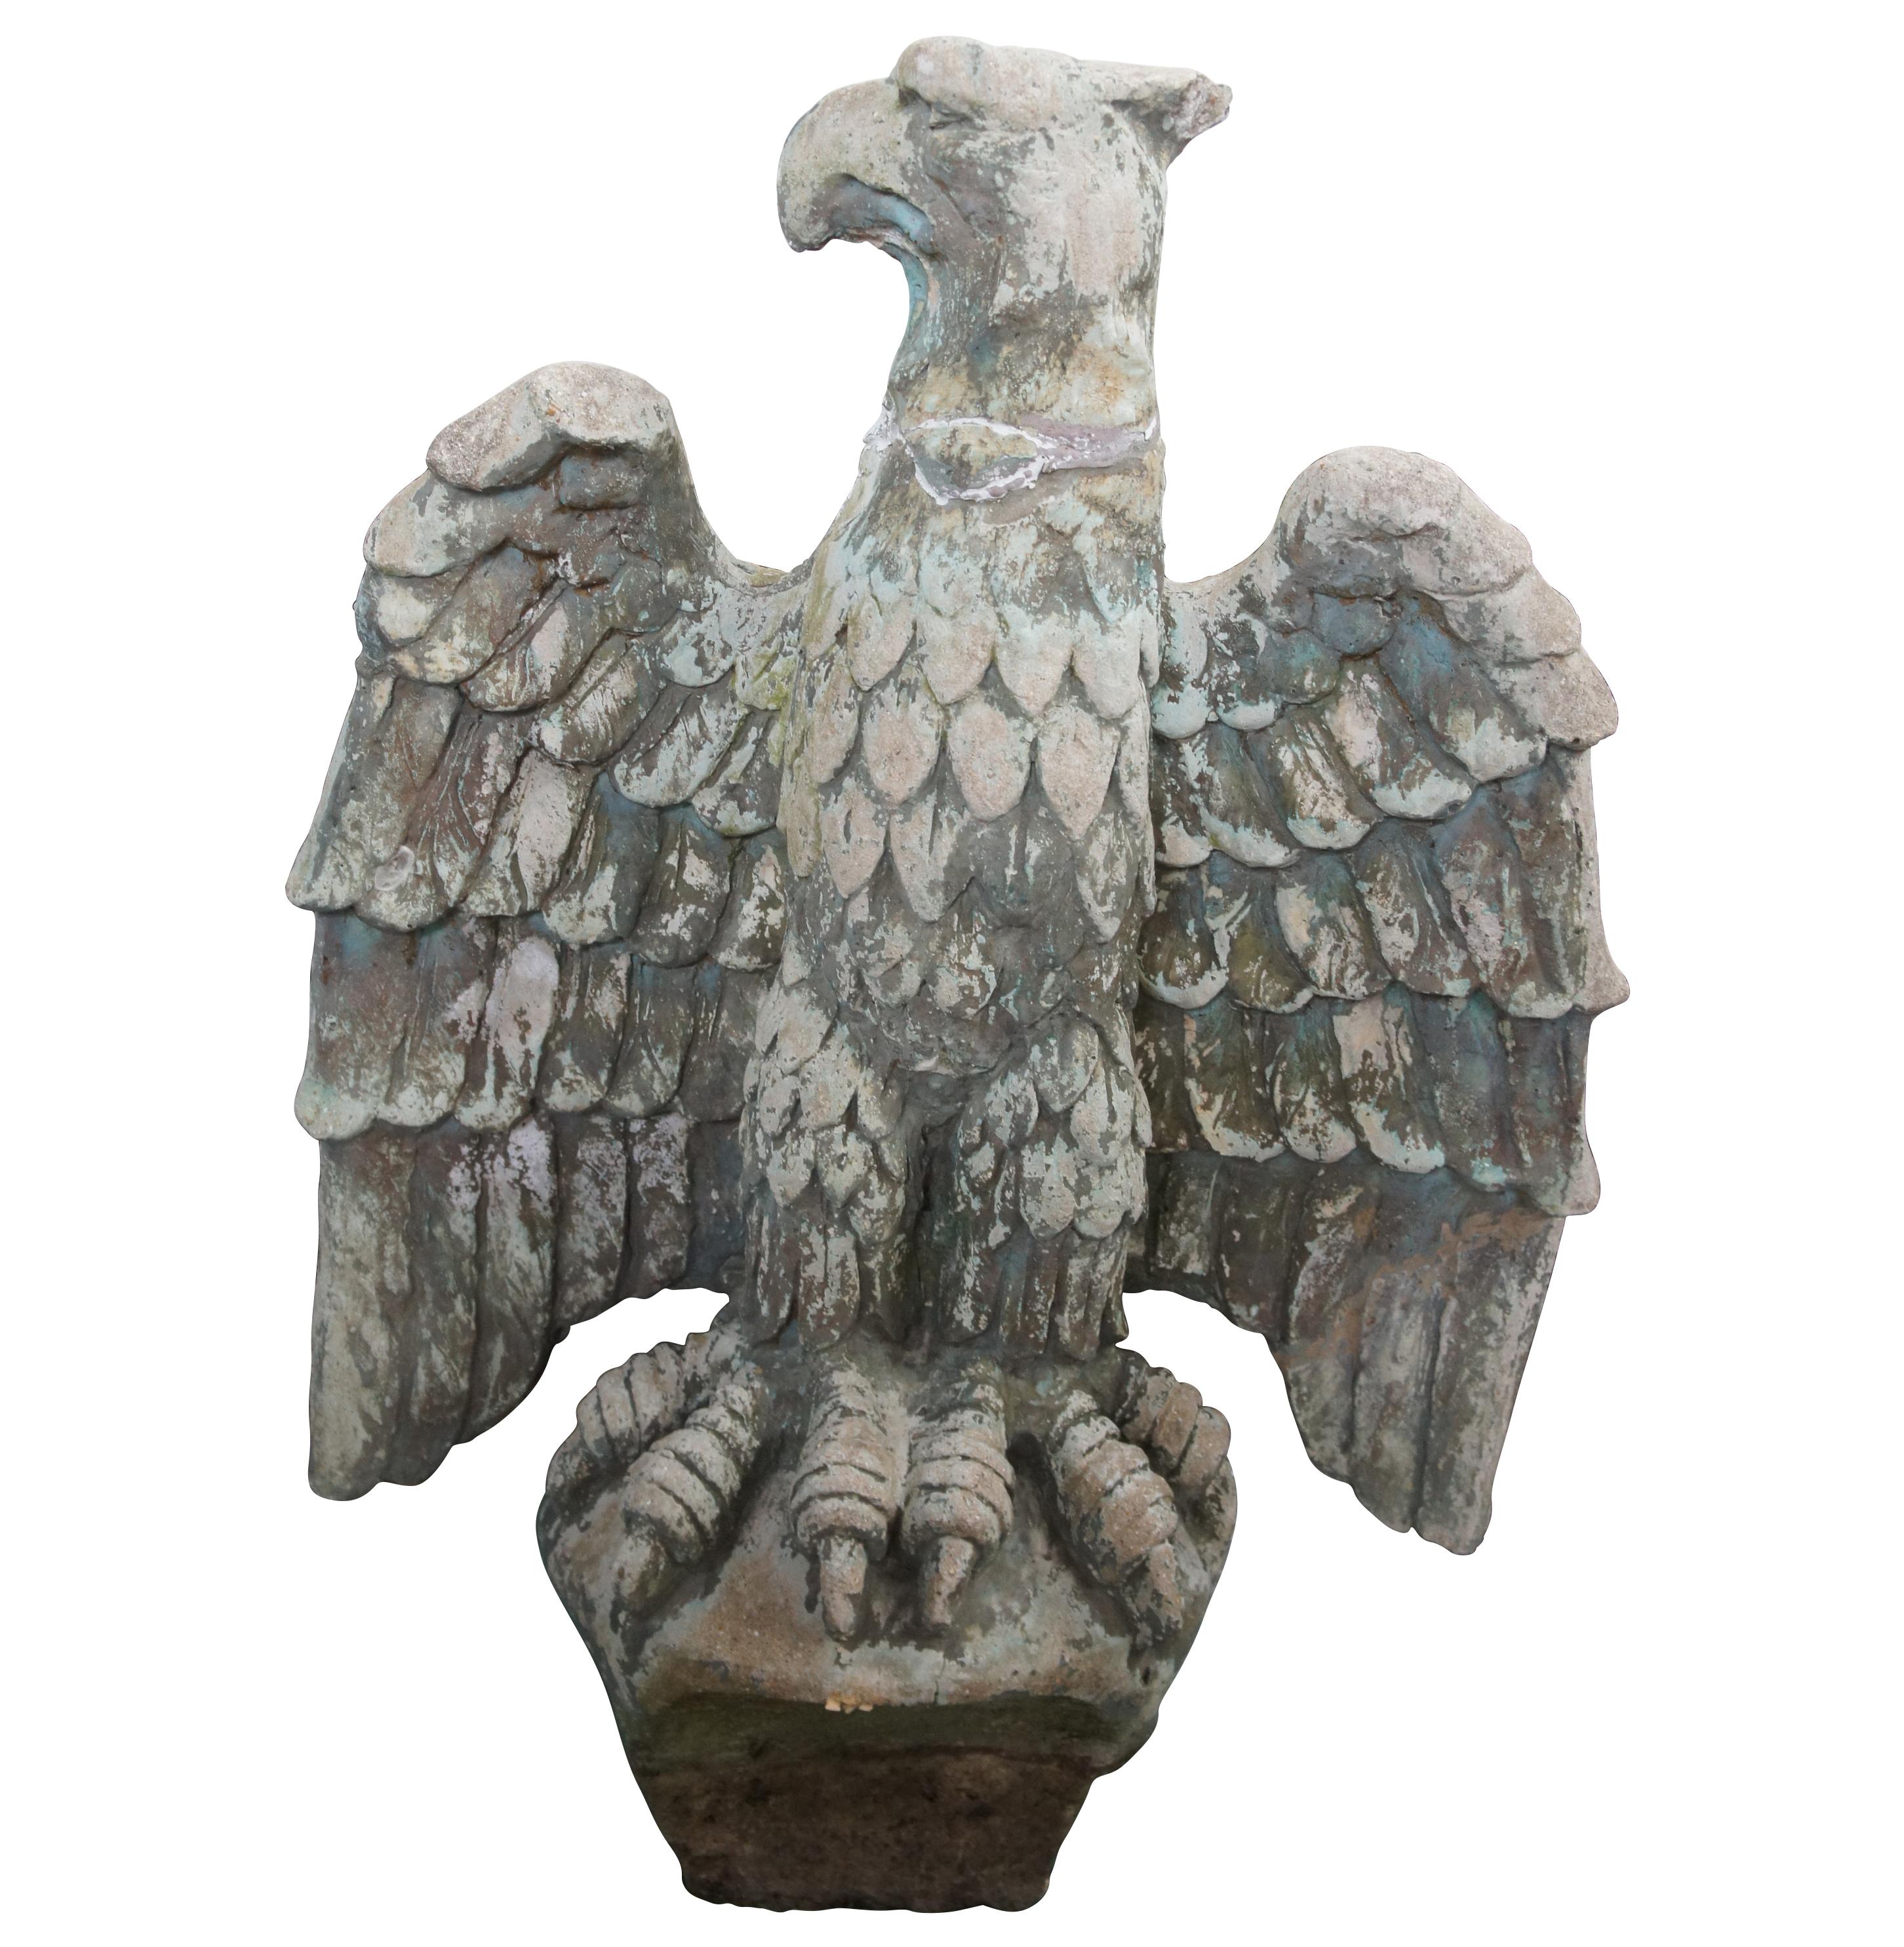 An impressive pair of early 20th century concrete / cast stone eagle sculptures. Lifelike in Size with apposing faces, outstretched wings and large talons. The bases of the statues are tapered allowing them to inset into the ground nicely. These